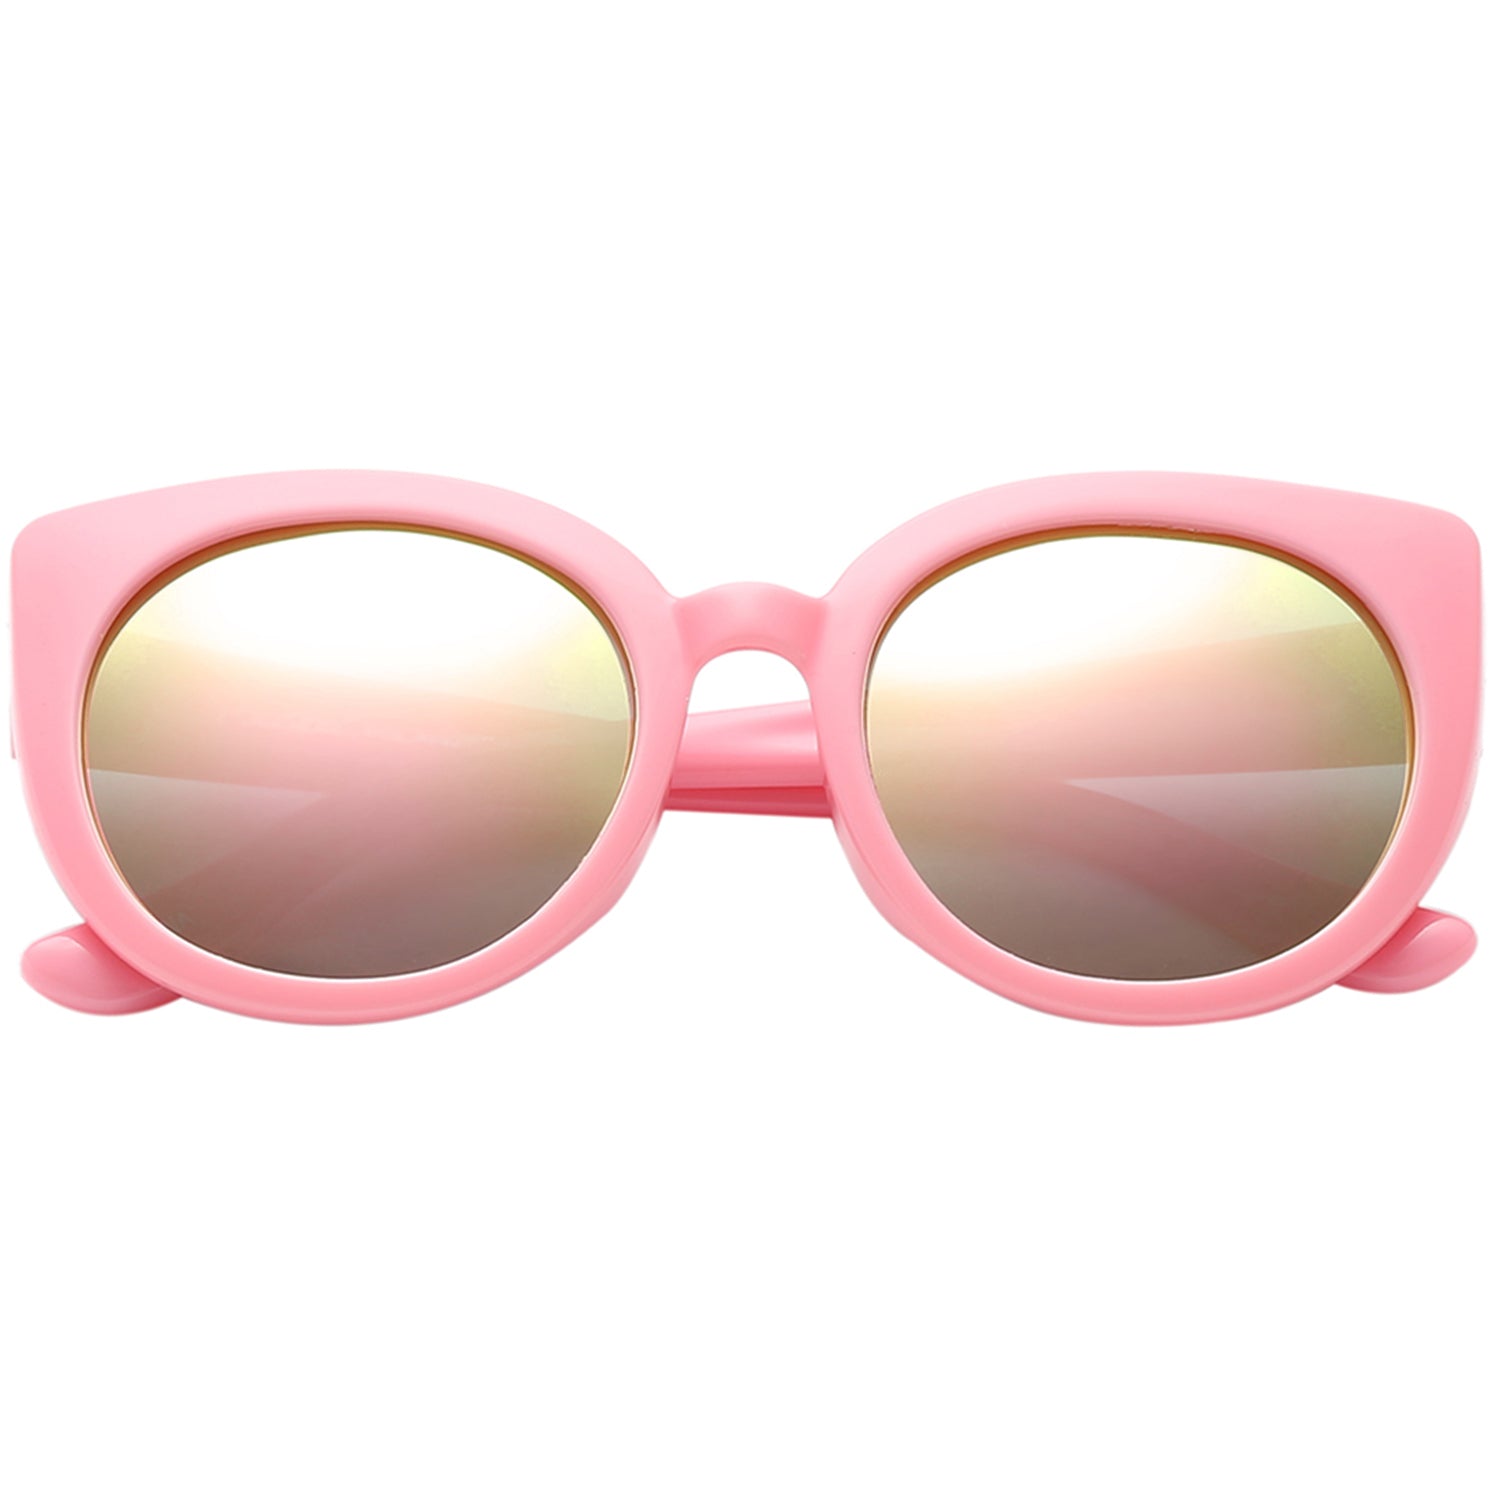 Polarspex Polarized Elastic Cateyes Style (BPA Free) Kids Sunglasses with Princess Pink Frames and Polarized Pink Quartz Lenses for Girls (Ages 2 - 8)